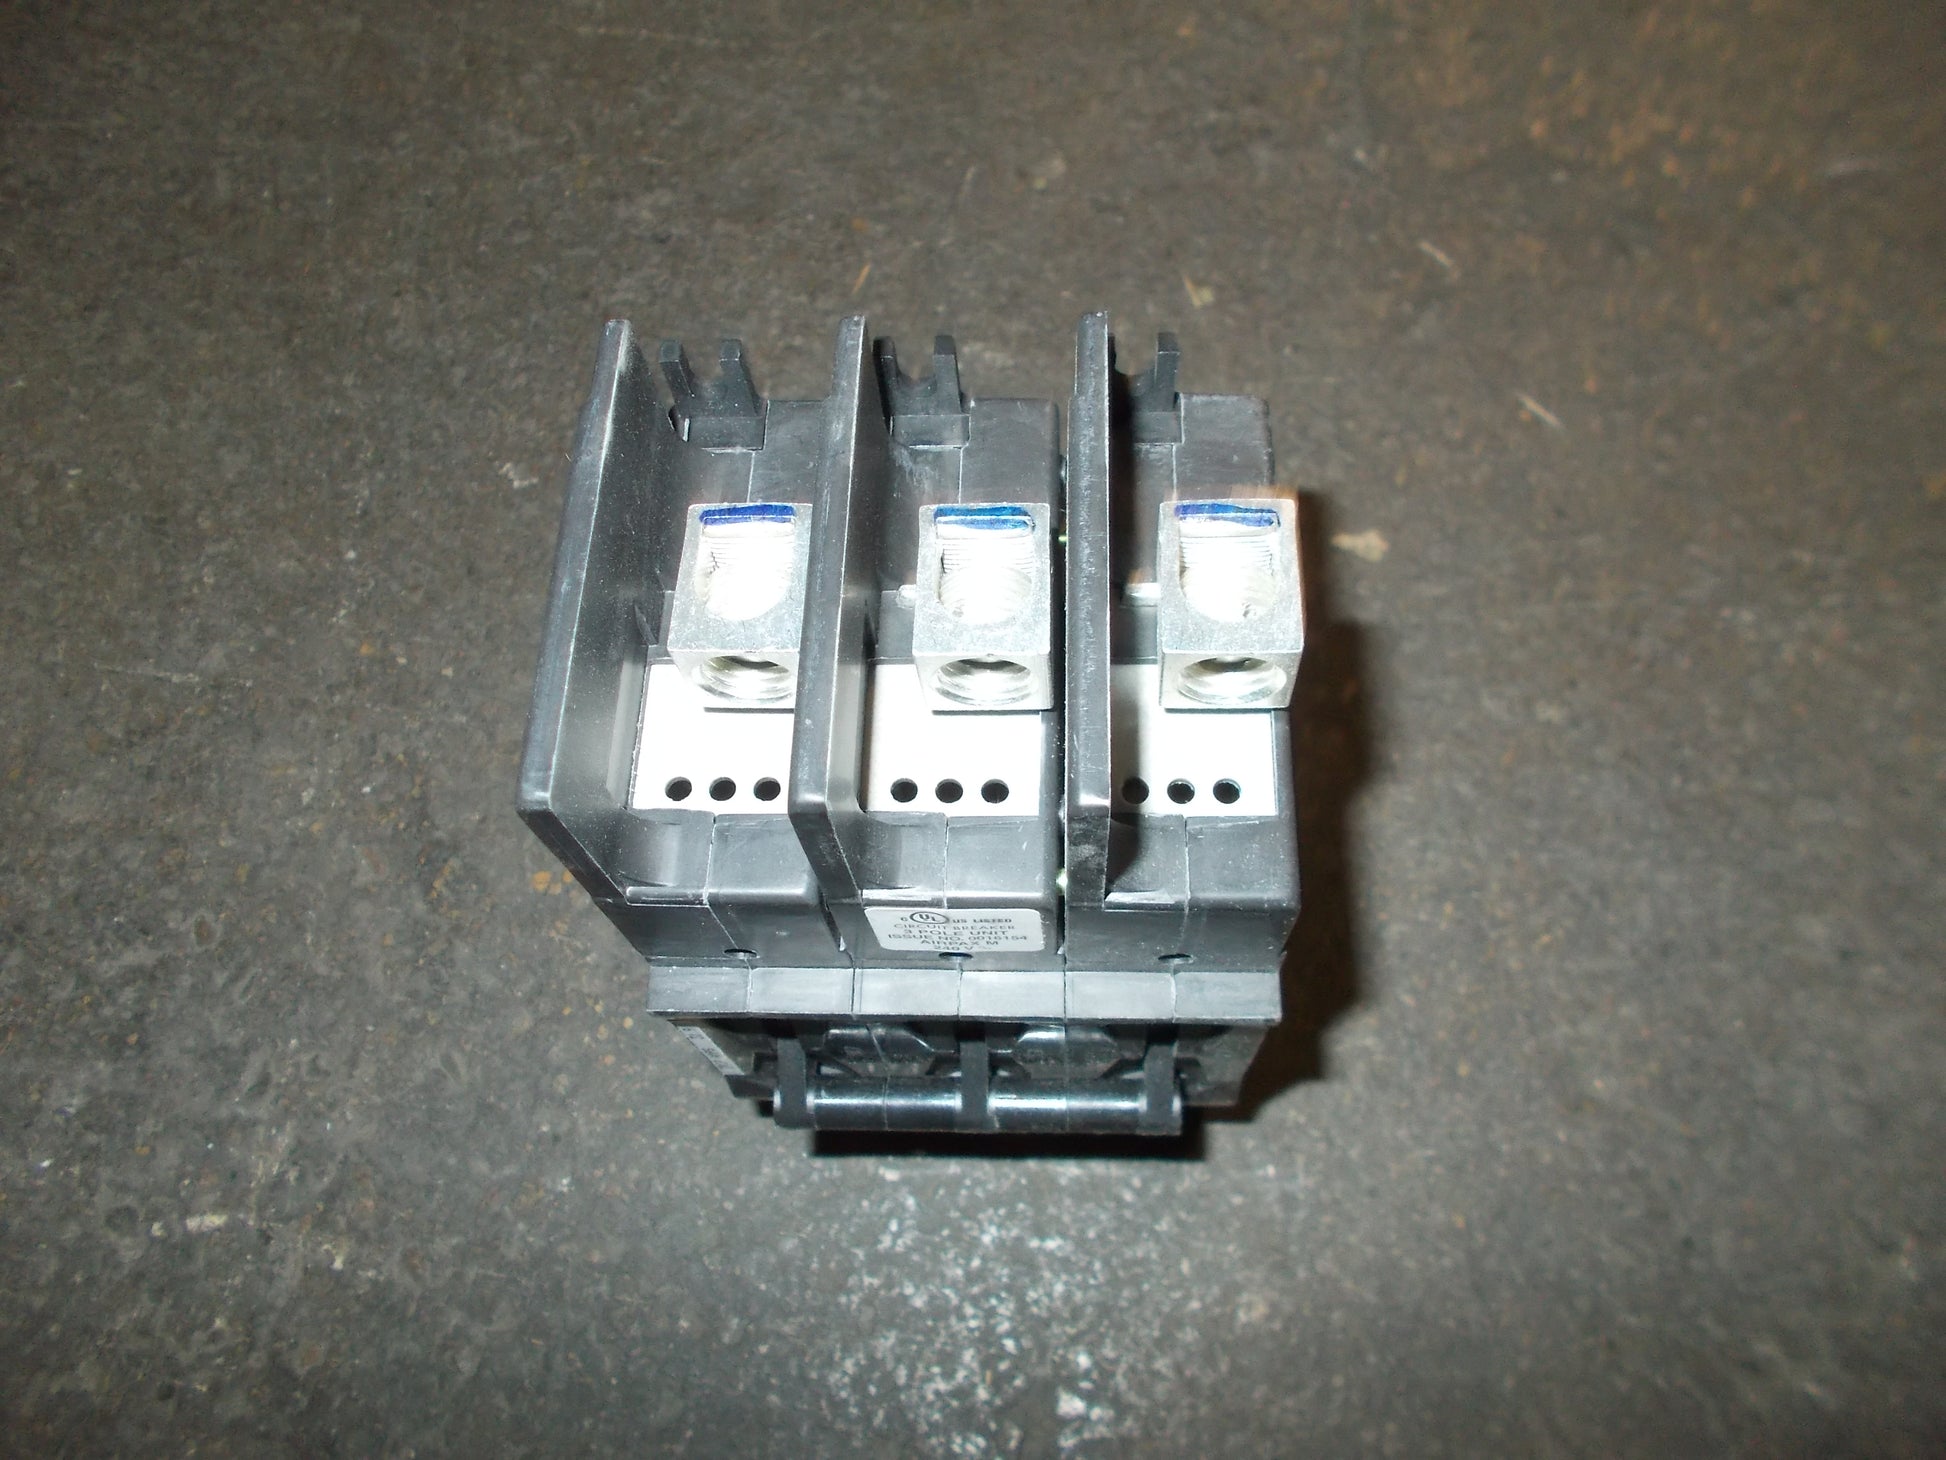 3 POLE 27.7 AMP "209 MULTI-POLE" SERIES HYDRAULIC MAGNETIC CIRCUIT BREAKER PROTECTOR 240/50-60/1 OR 3 